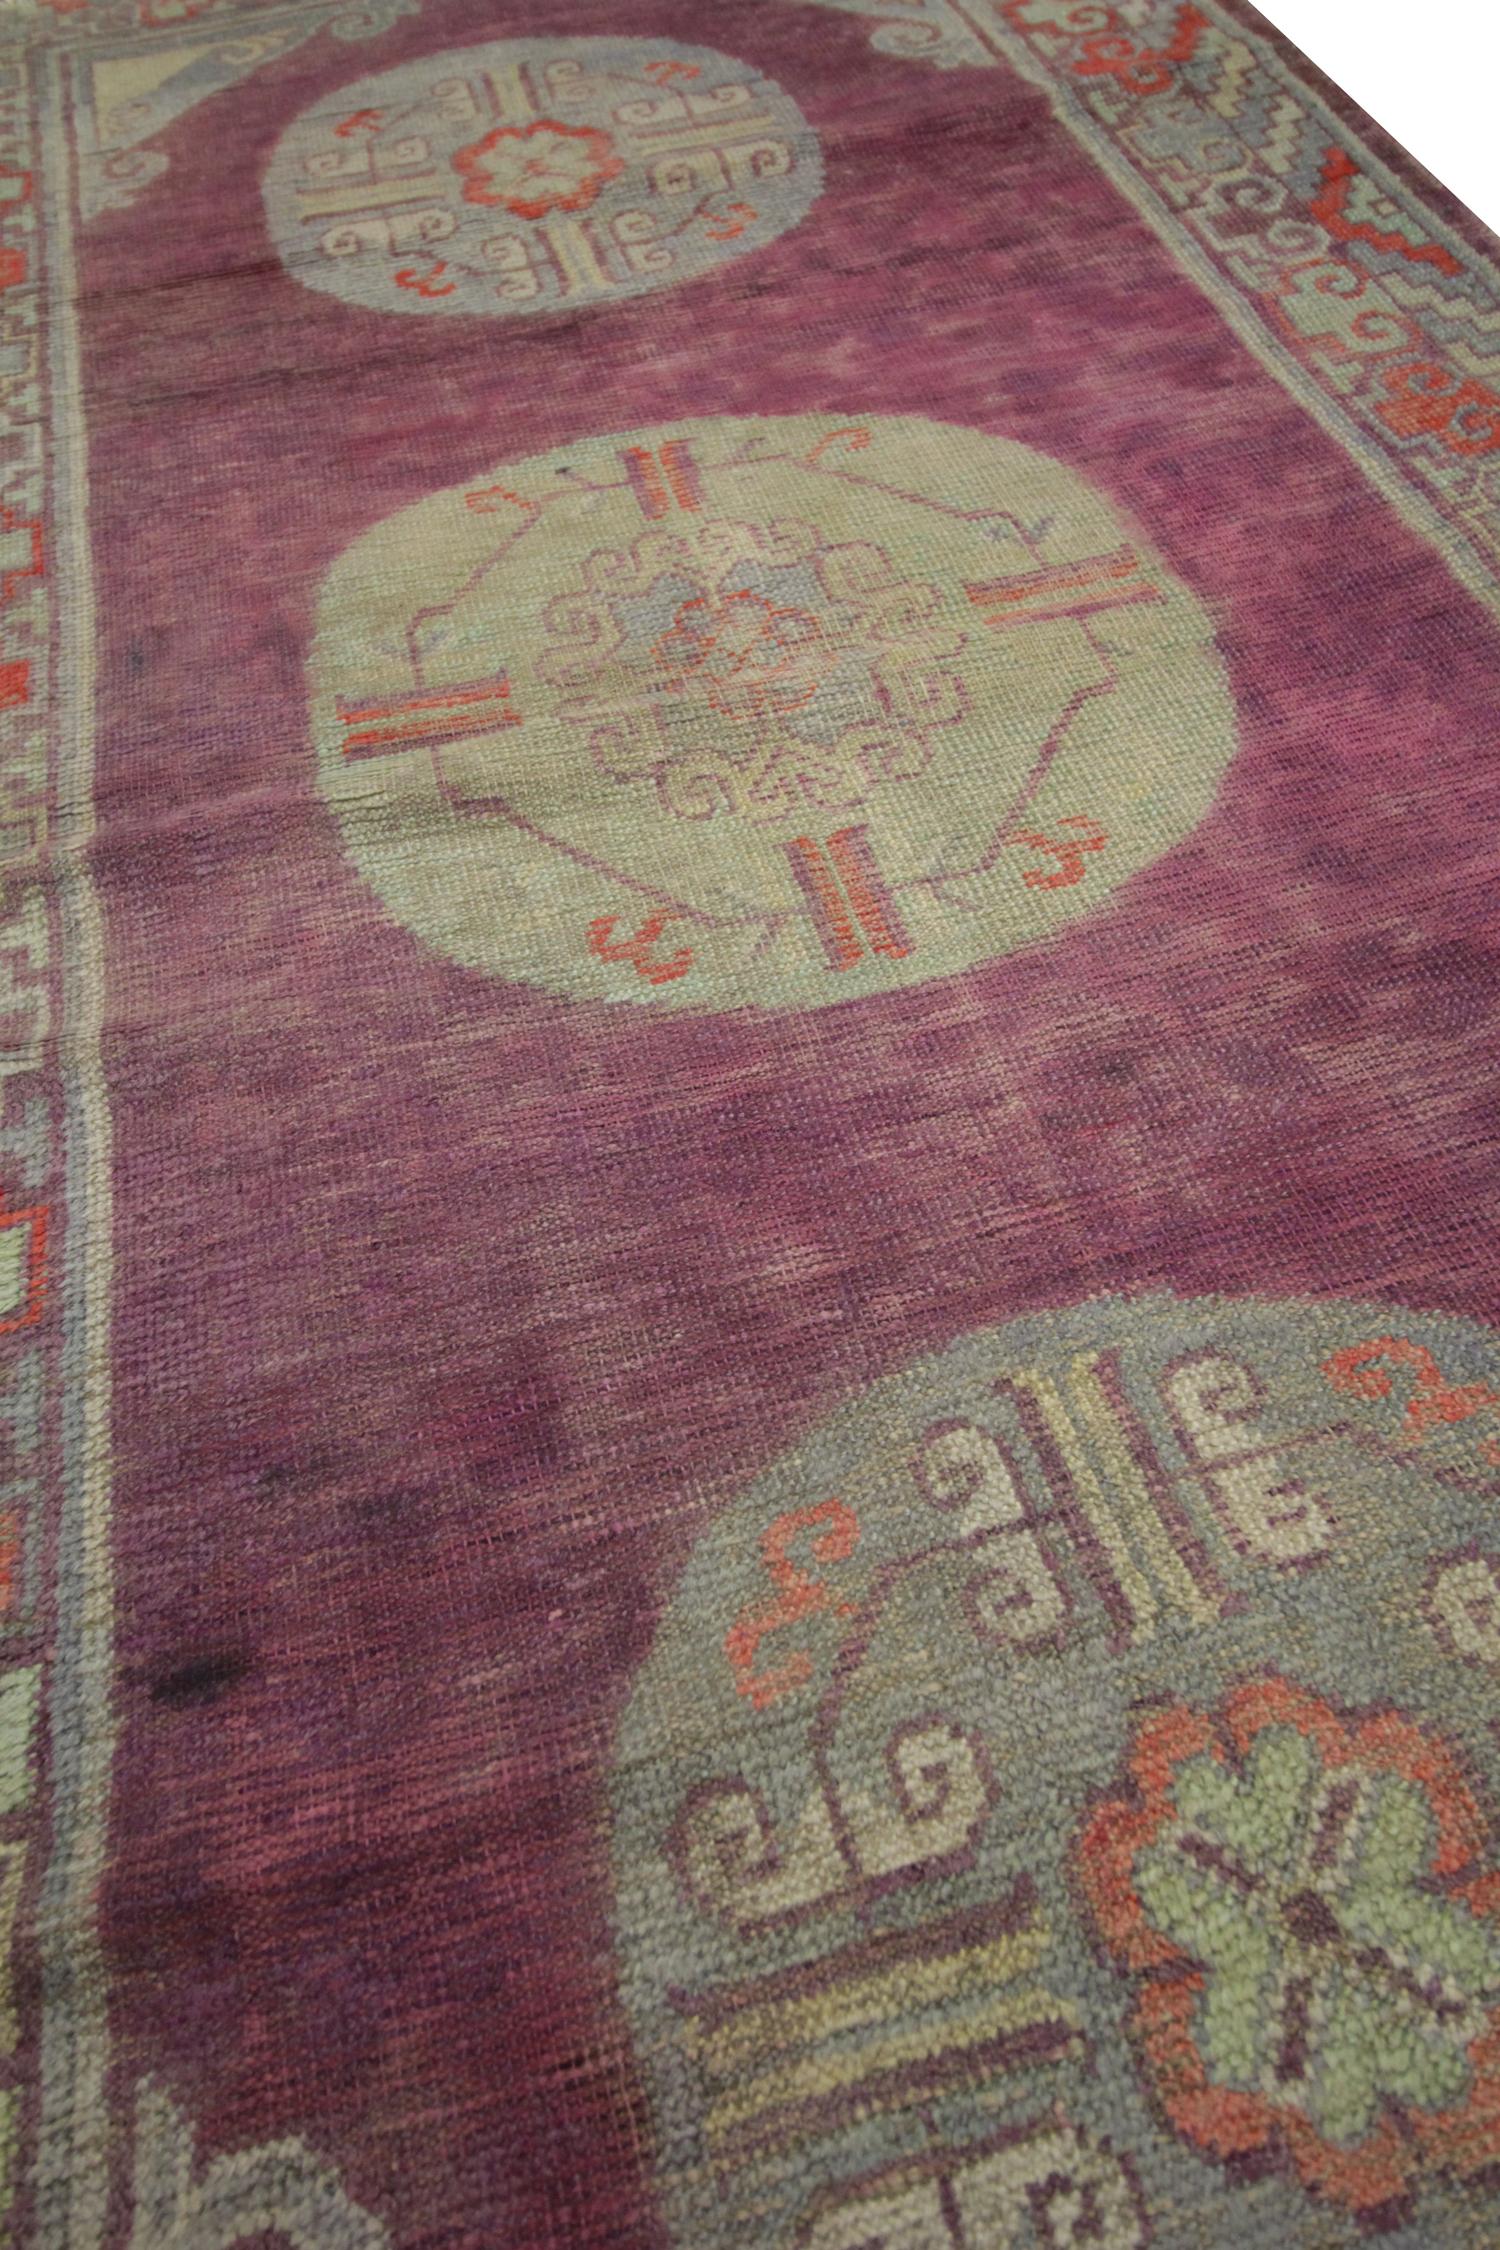 20th Century High-Quality Antique Rug Oriental Khotan, Pastel Colored Living Room Rugs